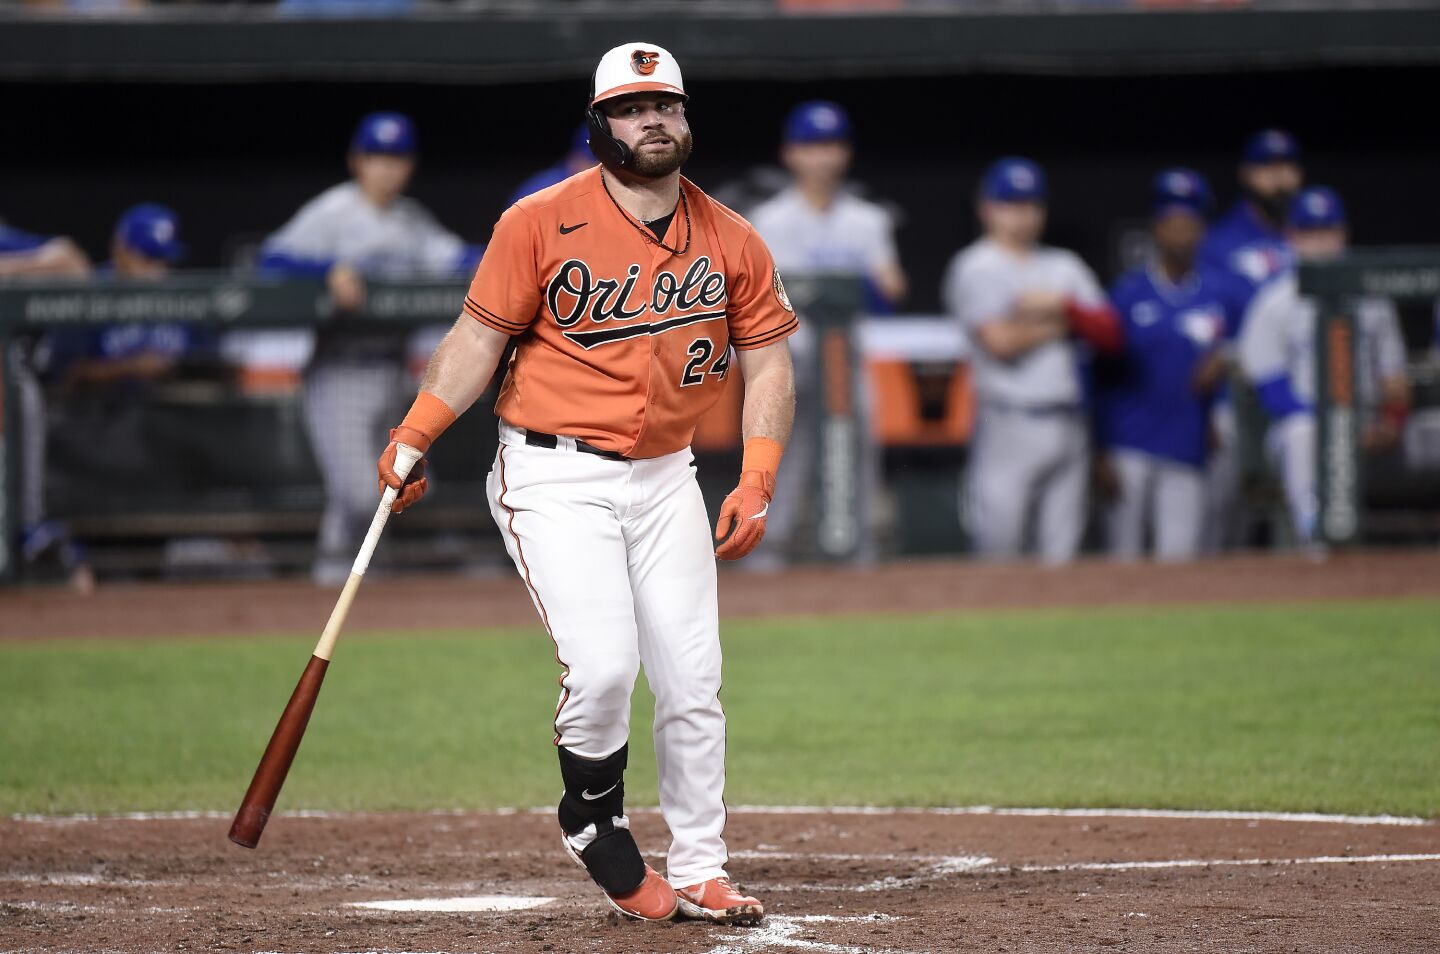 30 | Baltimore Orioles (46-97; LW: 30)The O’s played spoiler vs. the Yankees last week. Not so much this week against the Jays, who outscored Baltimore 44-19 to win the last three games of a four-game set this weekend.